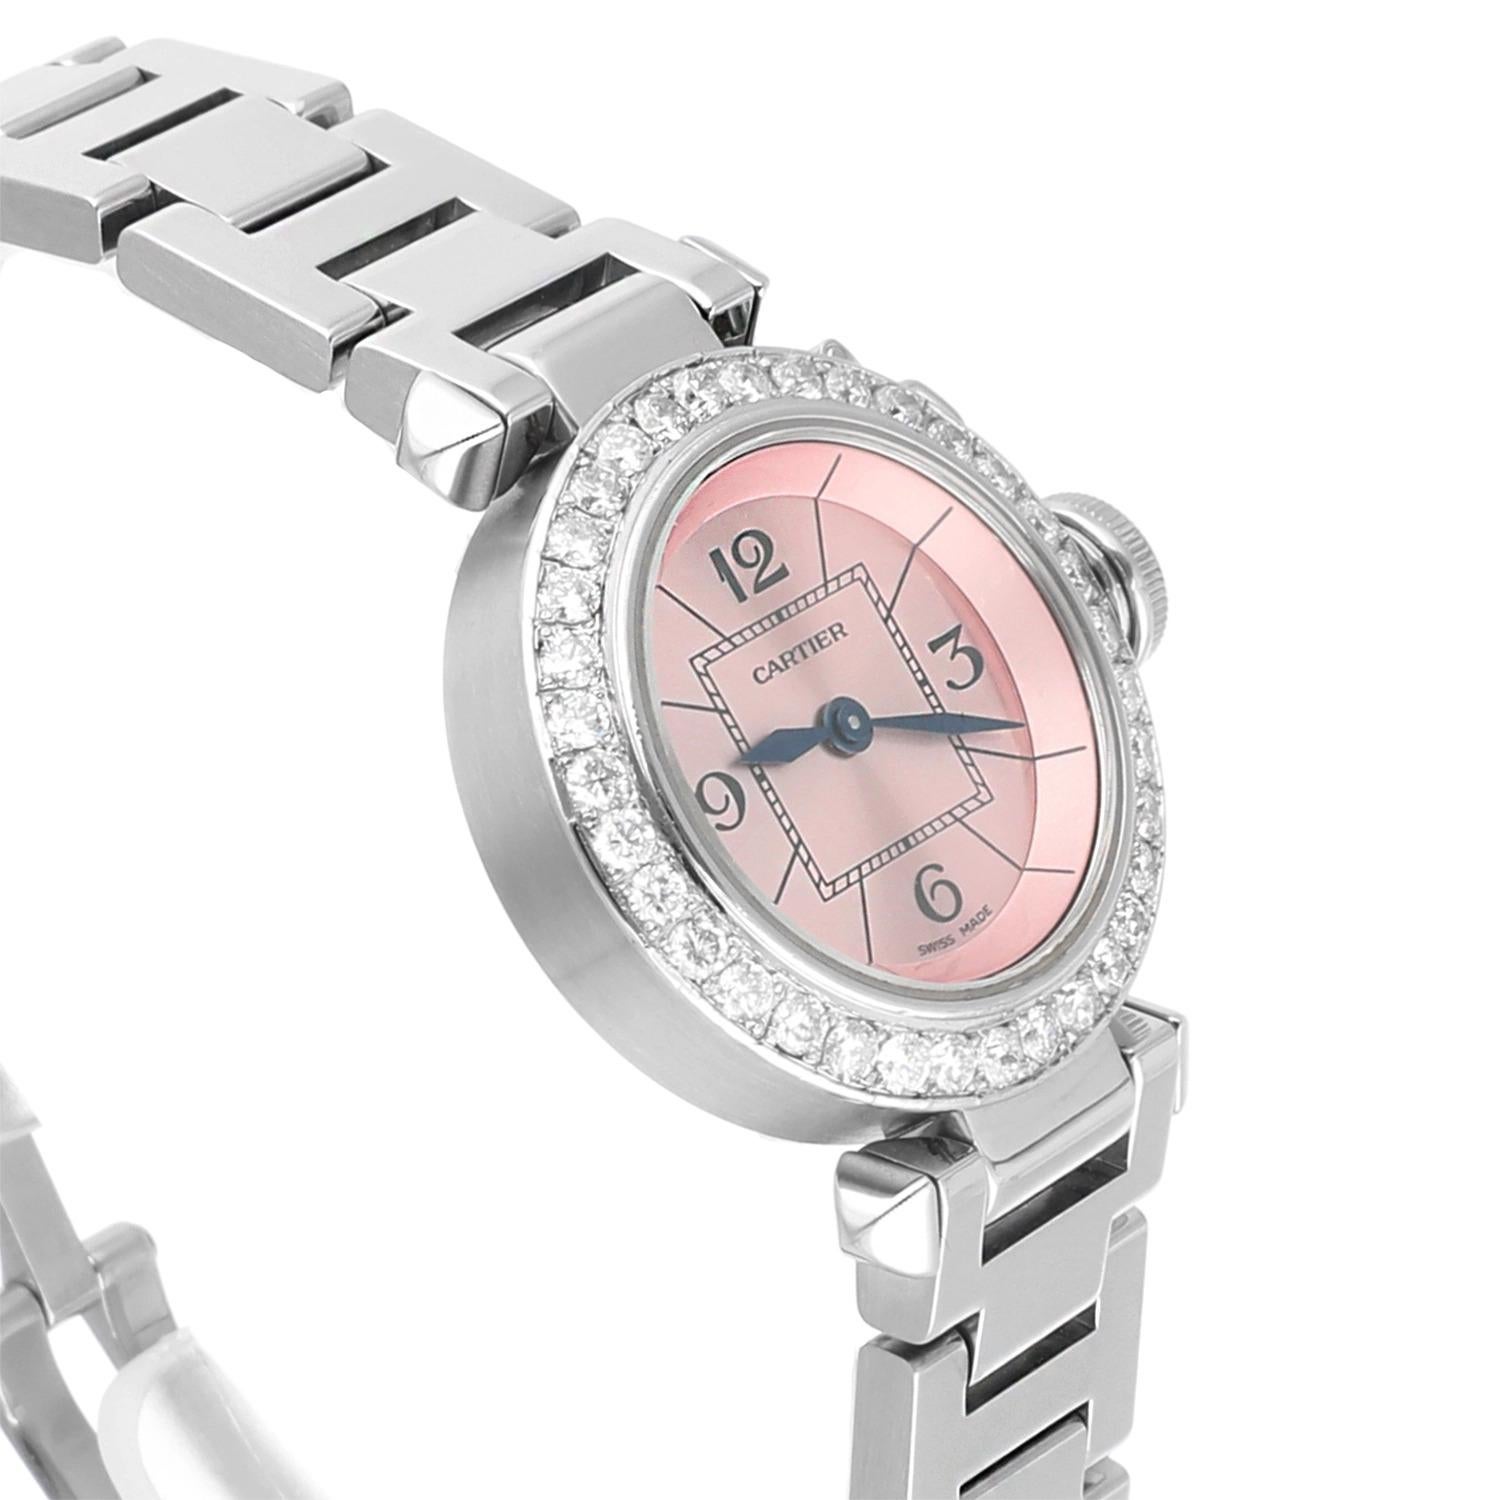 Cartier Pasha Miss Pasha Steel Pink Dial Ladies Watch W3140008 Diamond Bezel In Excellent Condition For Sale In New York, NY